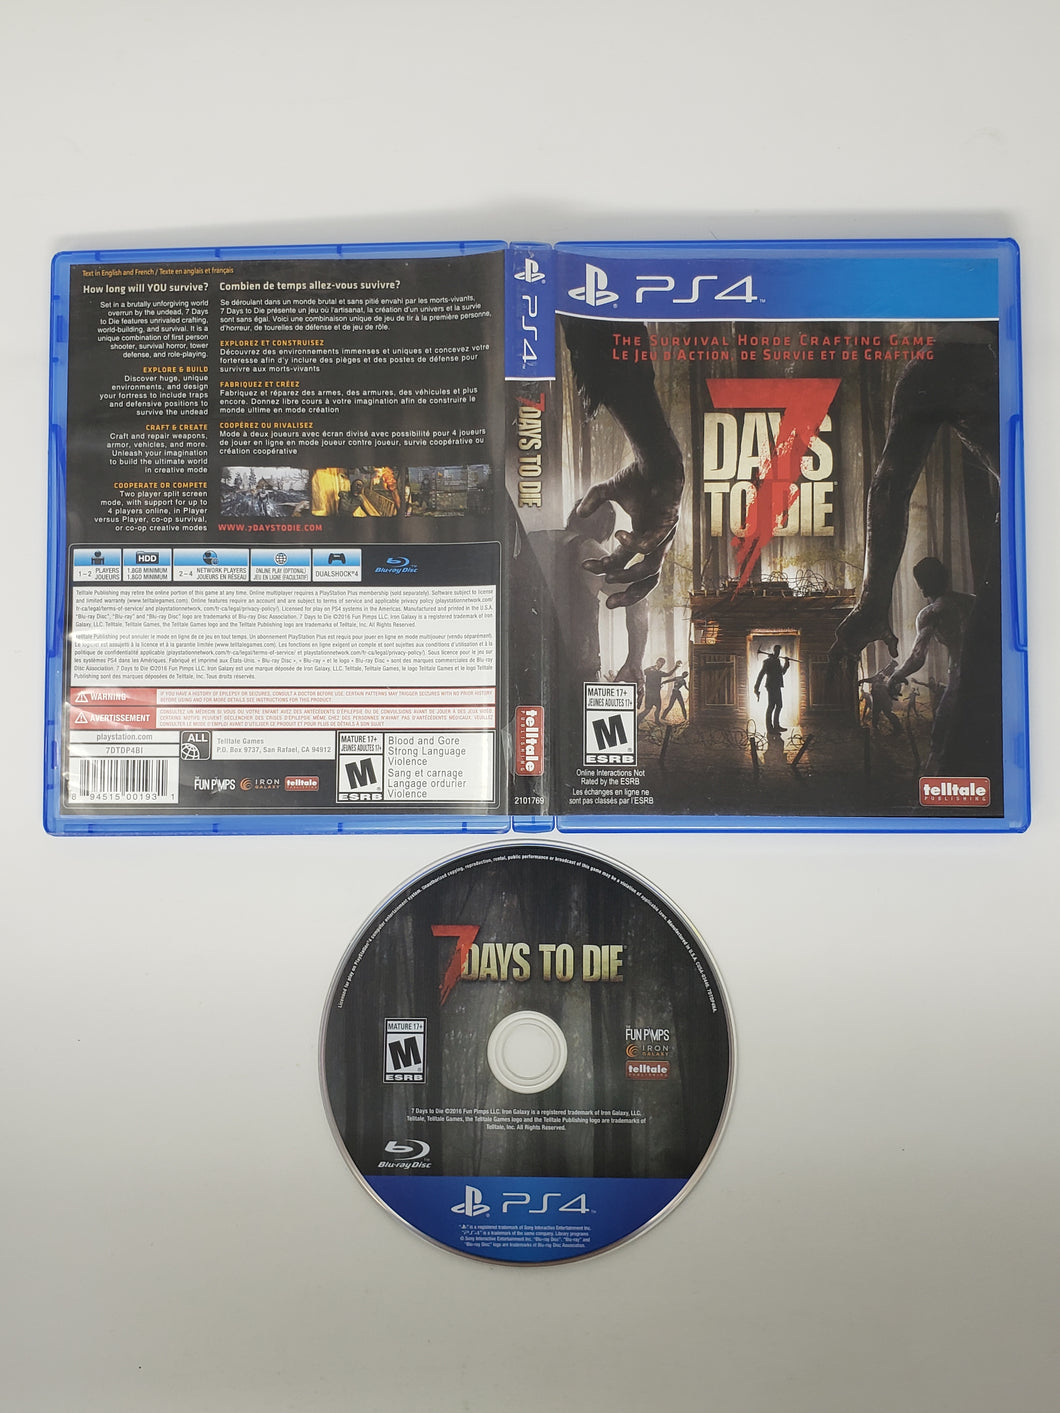 7 Days to Die - Sony Playstation 4 | PS4